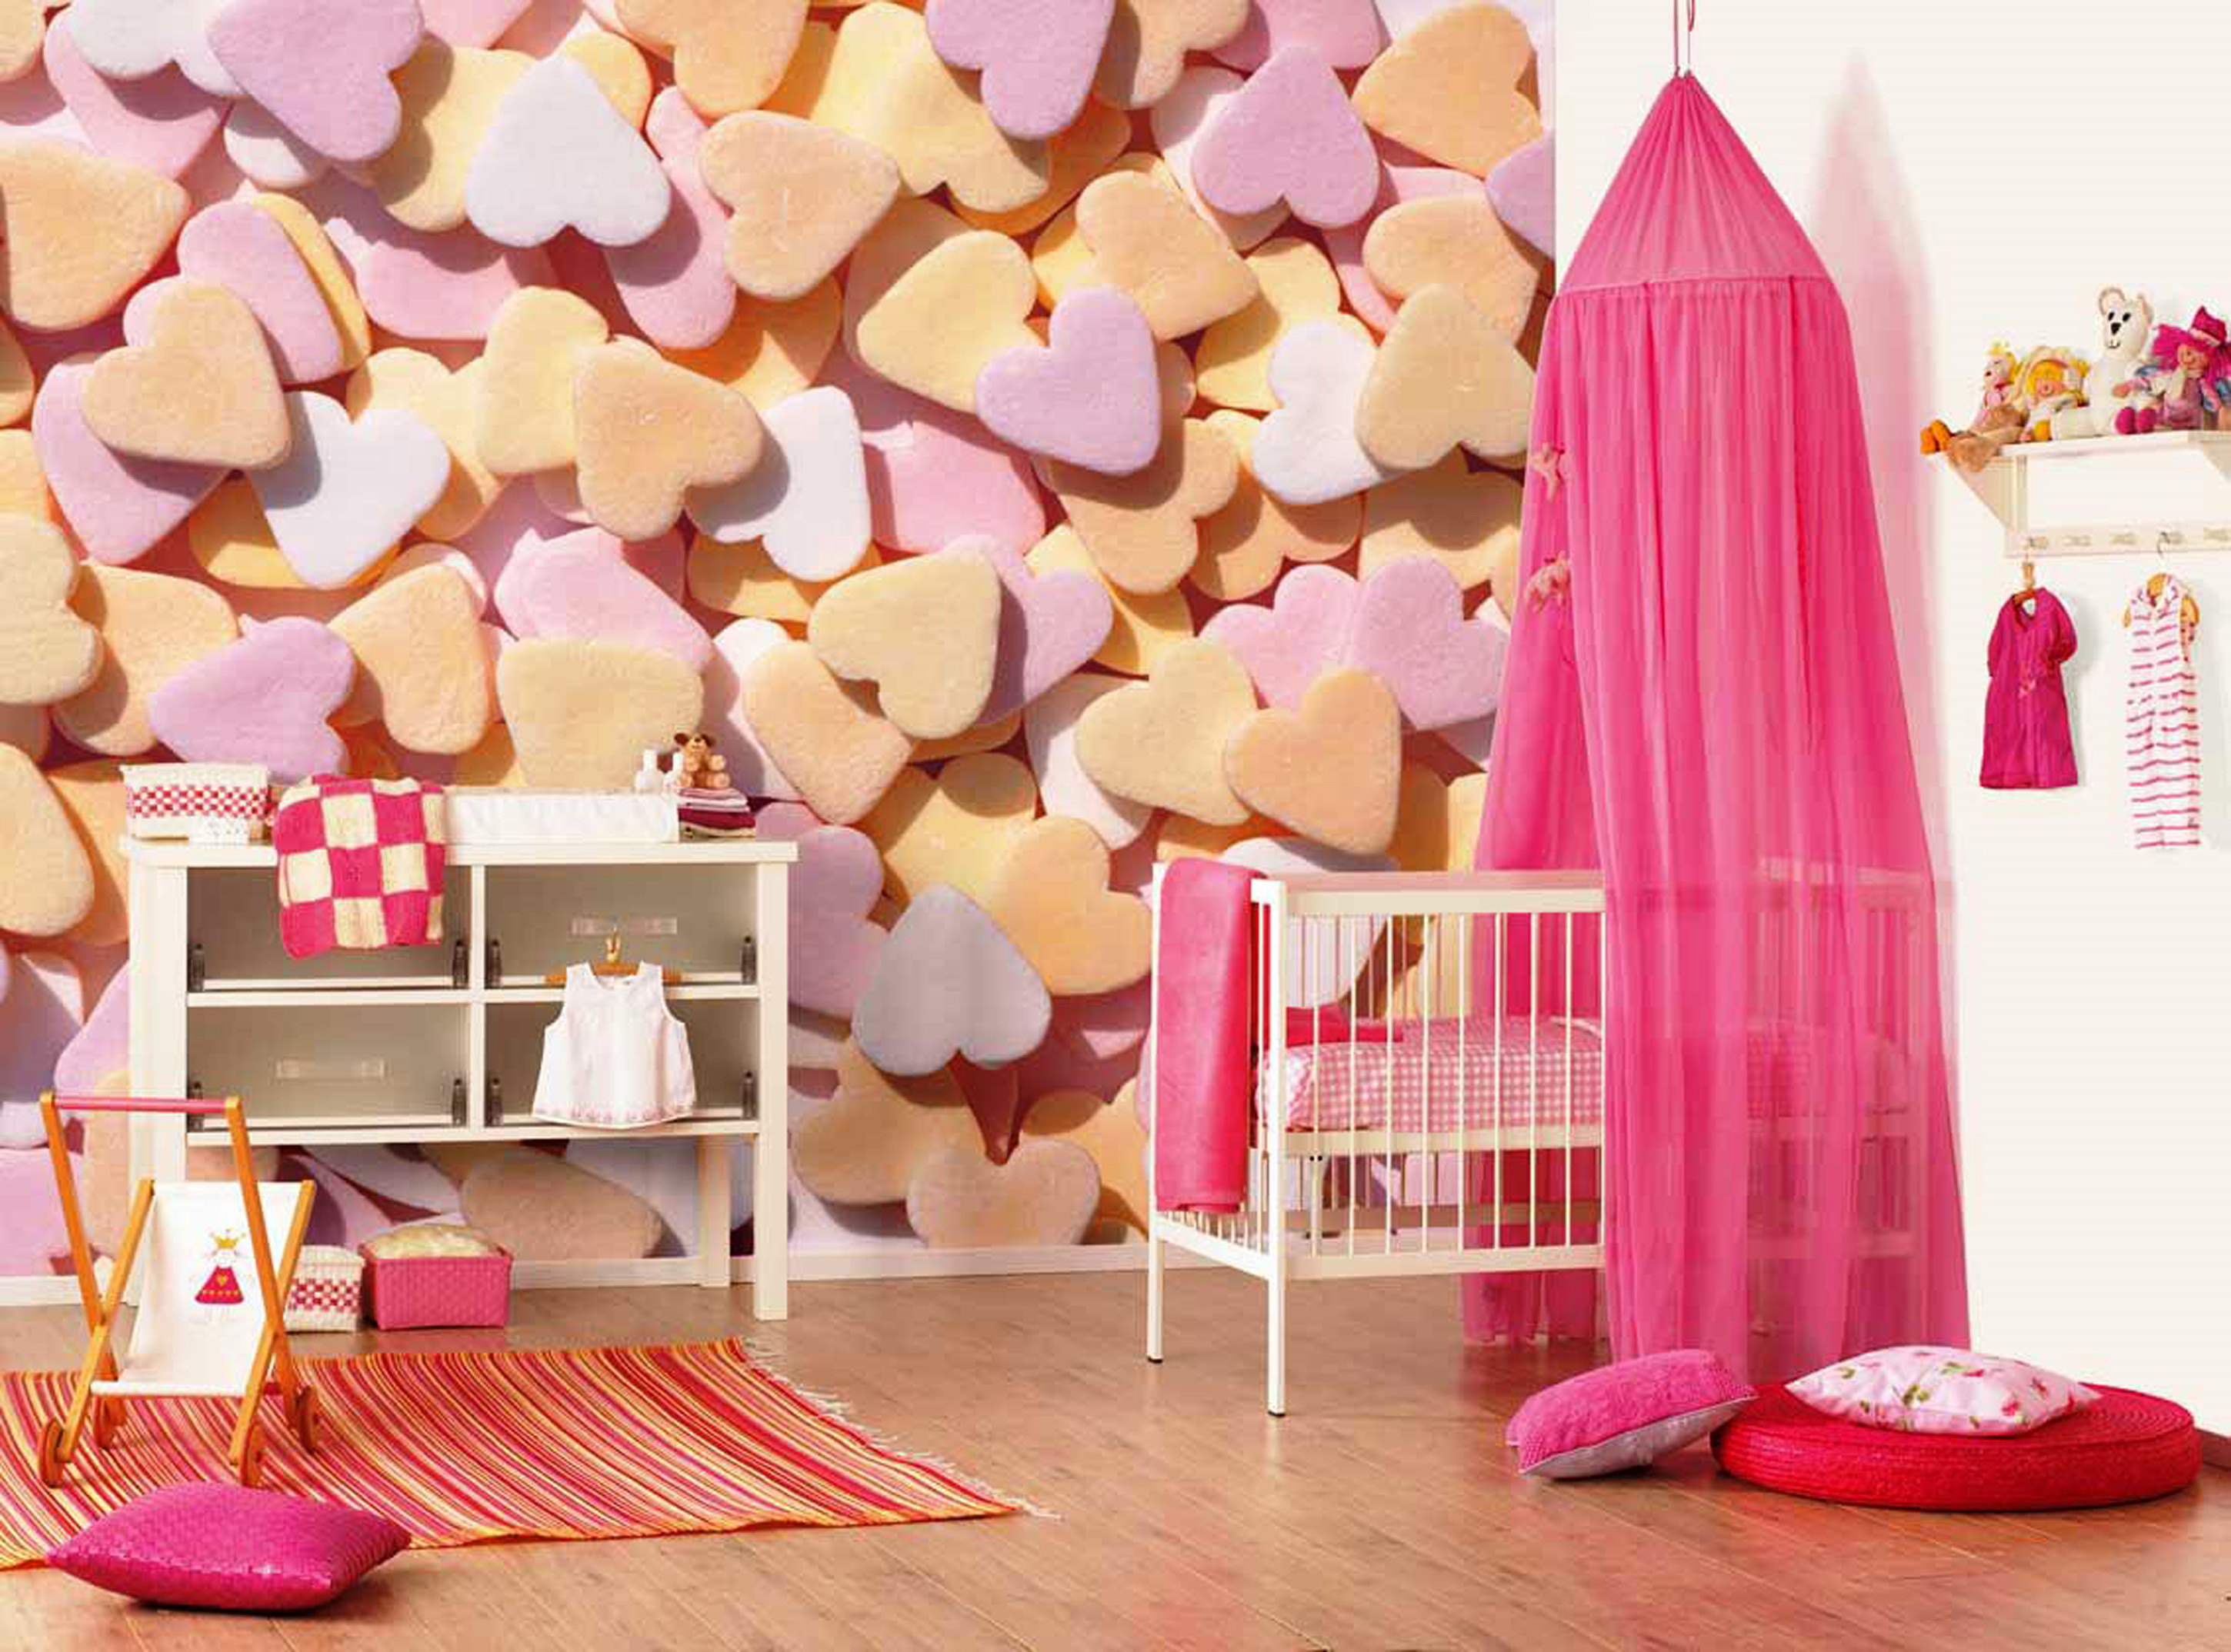 2900x2148 Bedroom Romantic Girls Design With White Crib Fuchsia Curtain And Colourful  Heart Wallpaper Also Drawer Chest kids ...